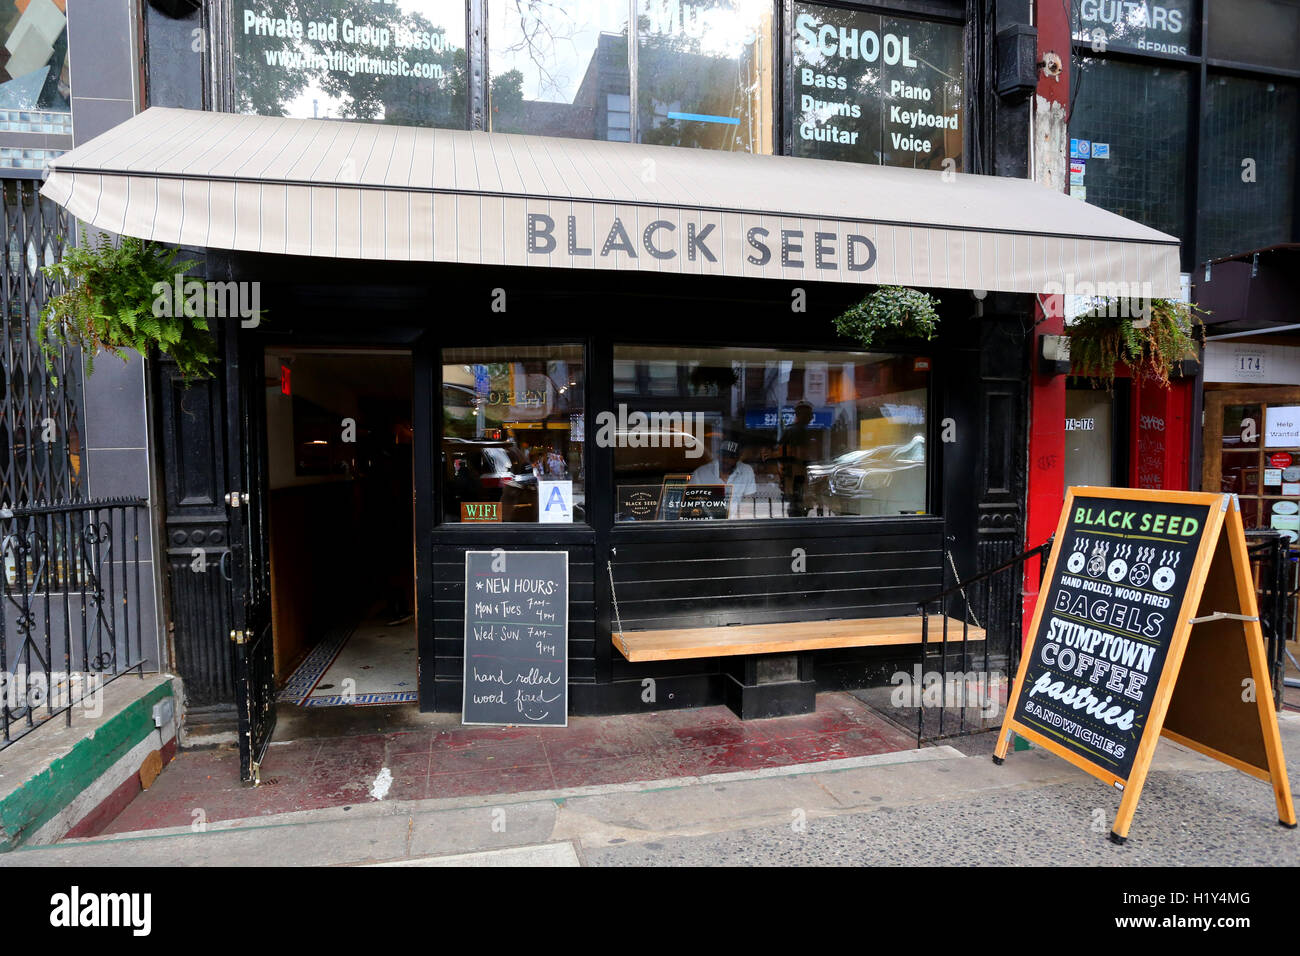 Black Seed, 176 First Ave, New York, NY. exterior storefront of a bagel shop in the East Village neighborhood of Manhattan. Stock Photo